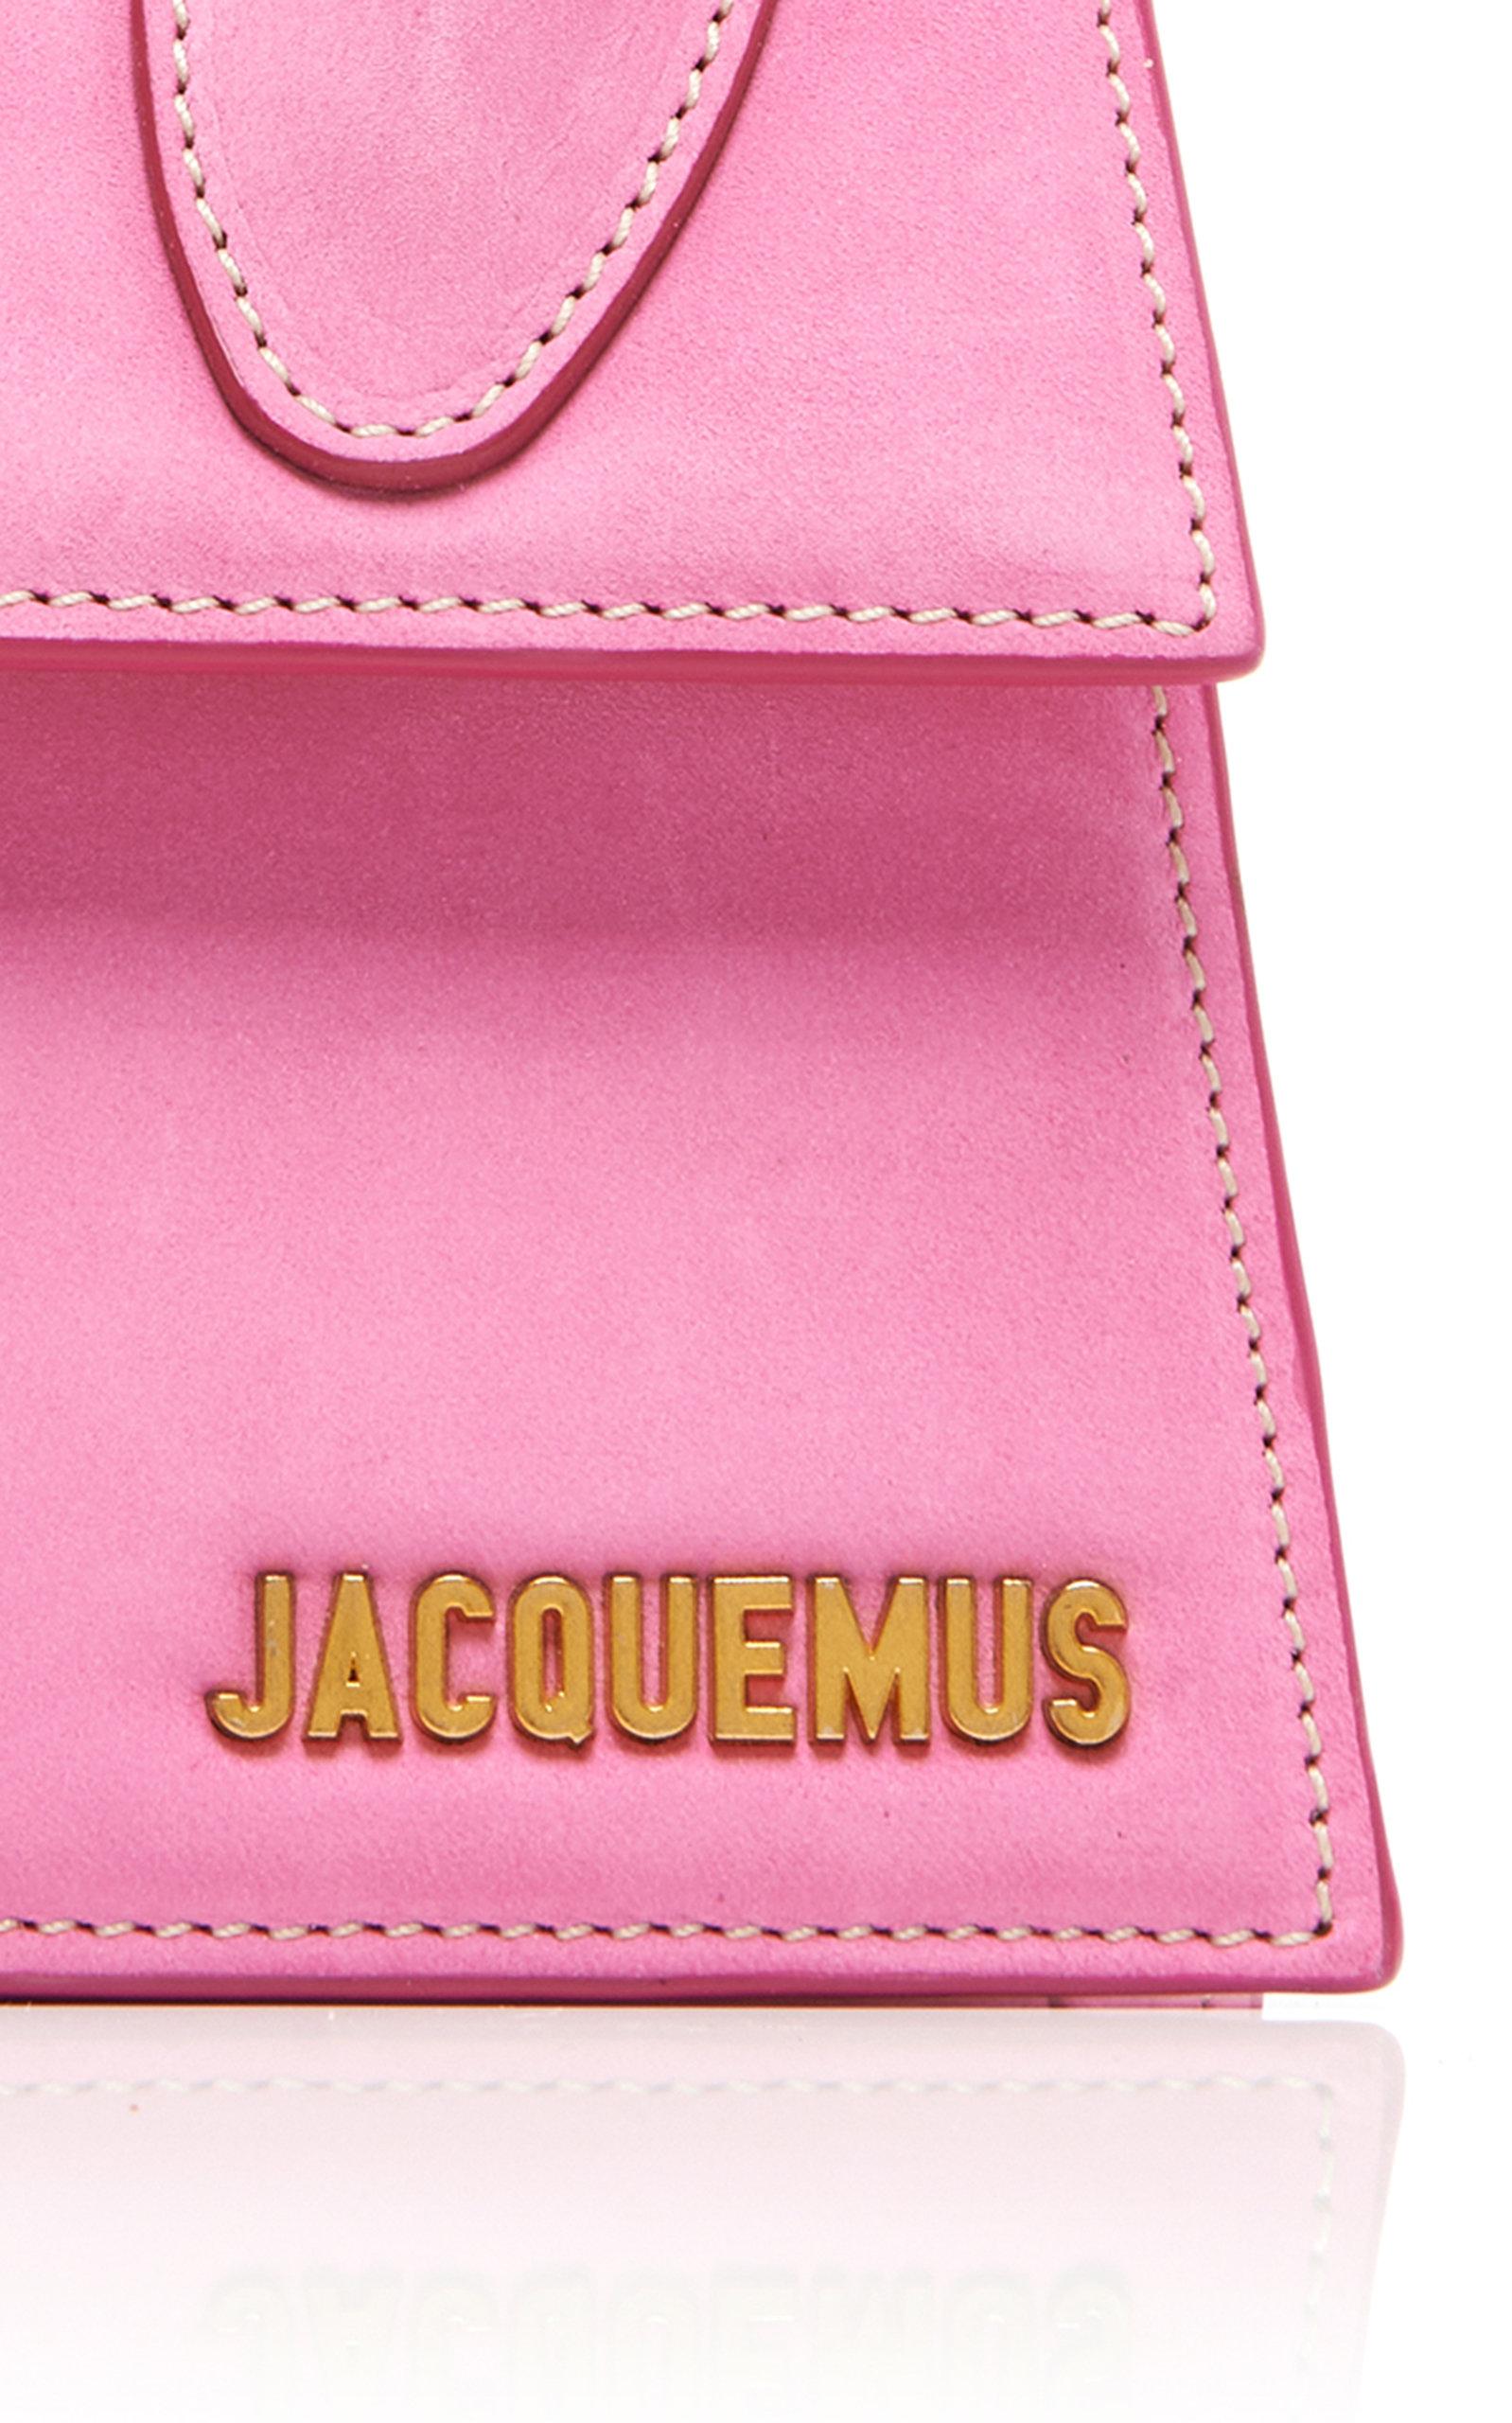 3D model Jacquemus Le Chiquito Noeud Bag Pink VR / AR / low-poly